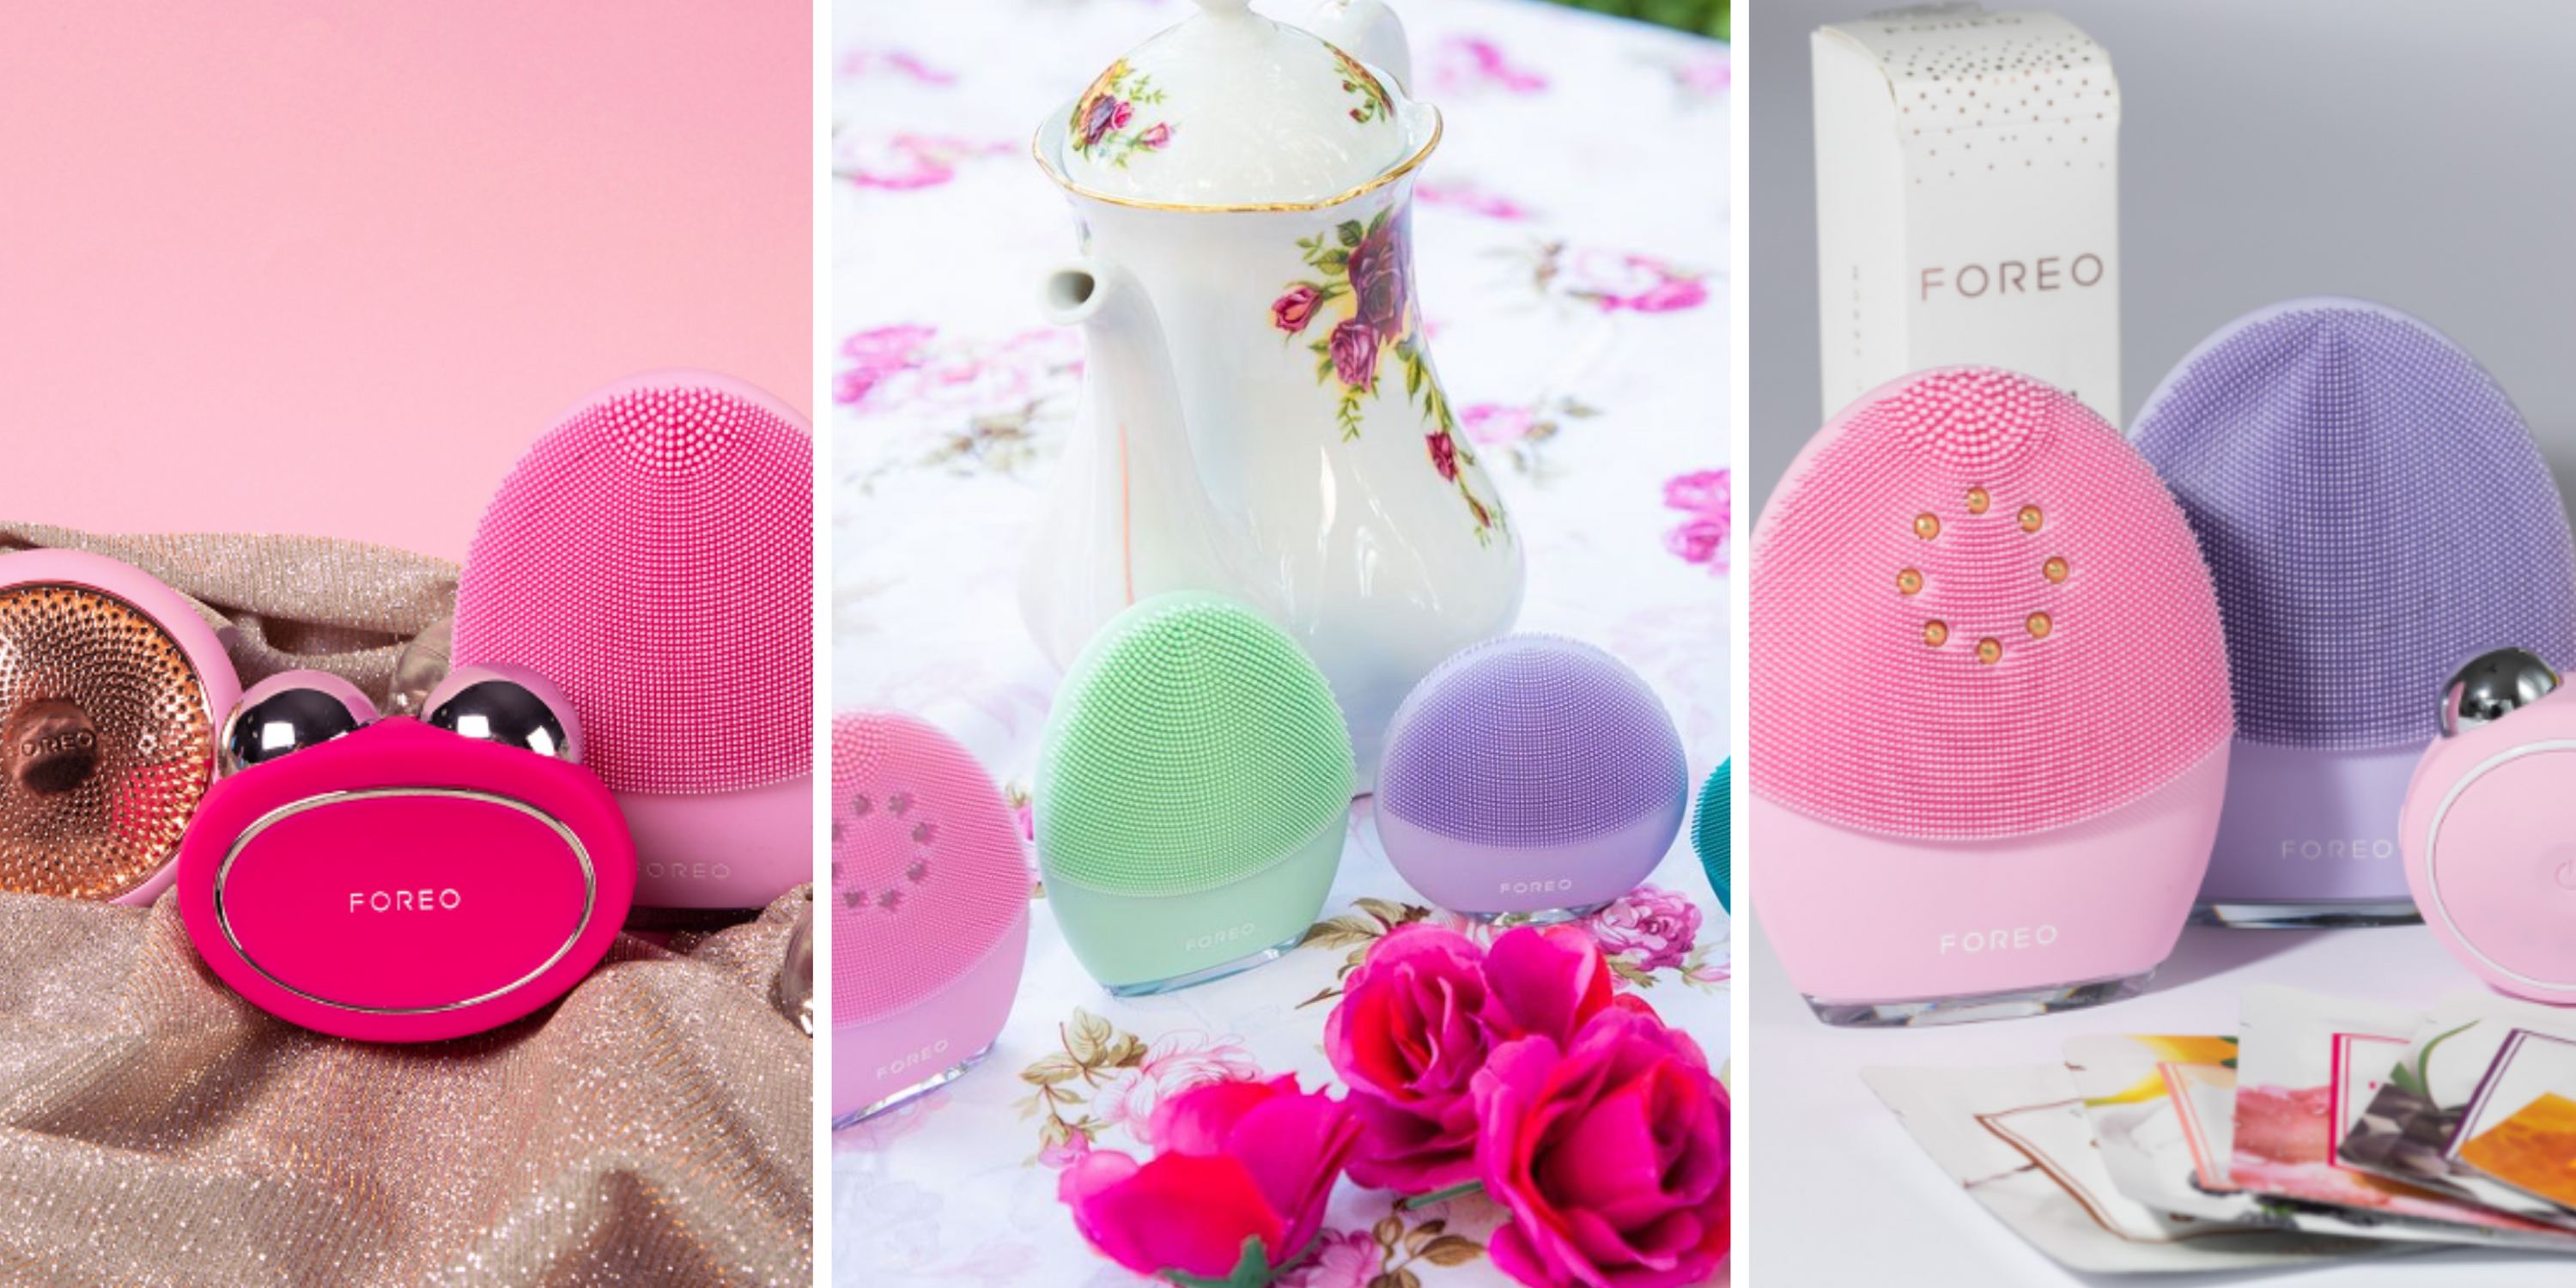 Foreo: Is It Really Worth the Hype?